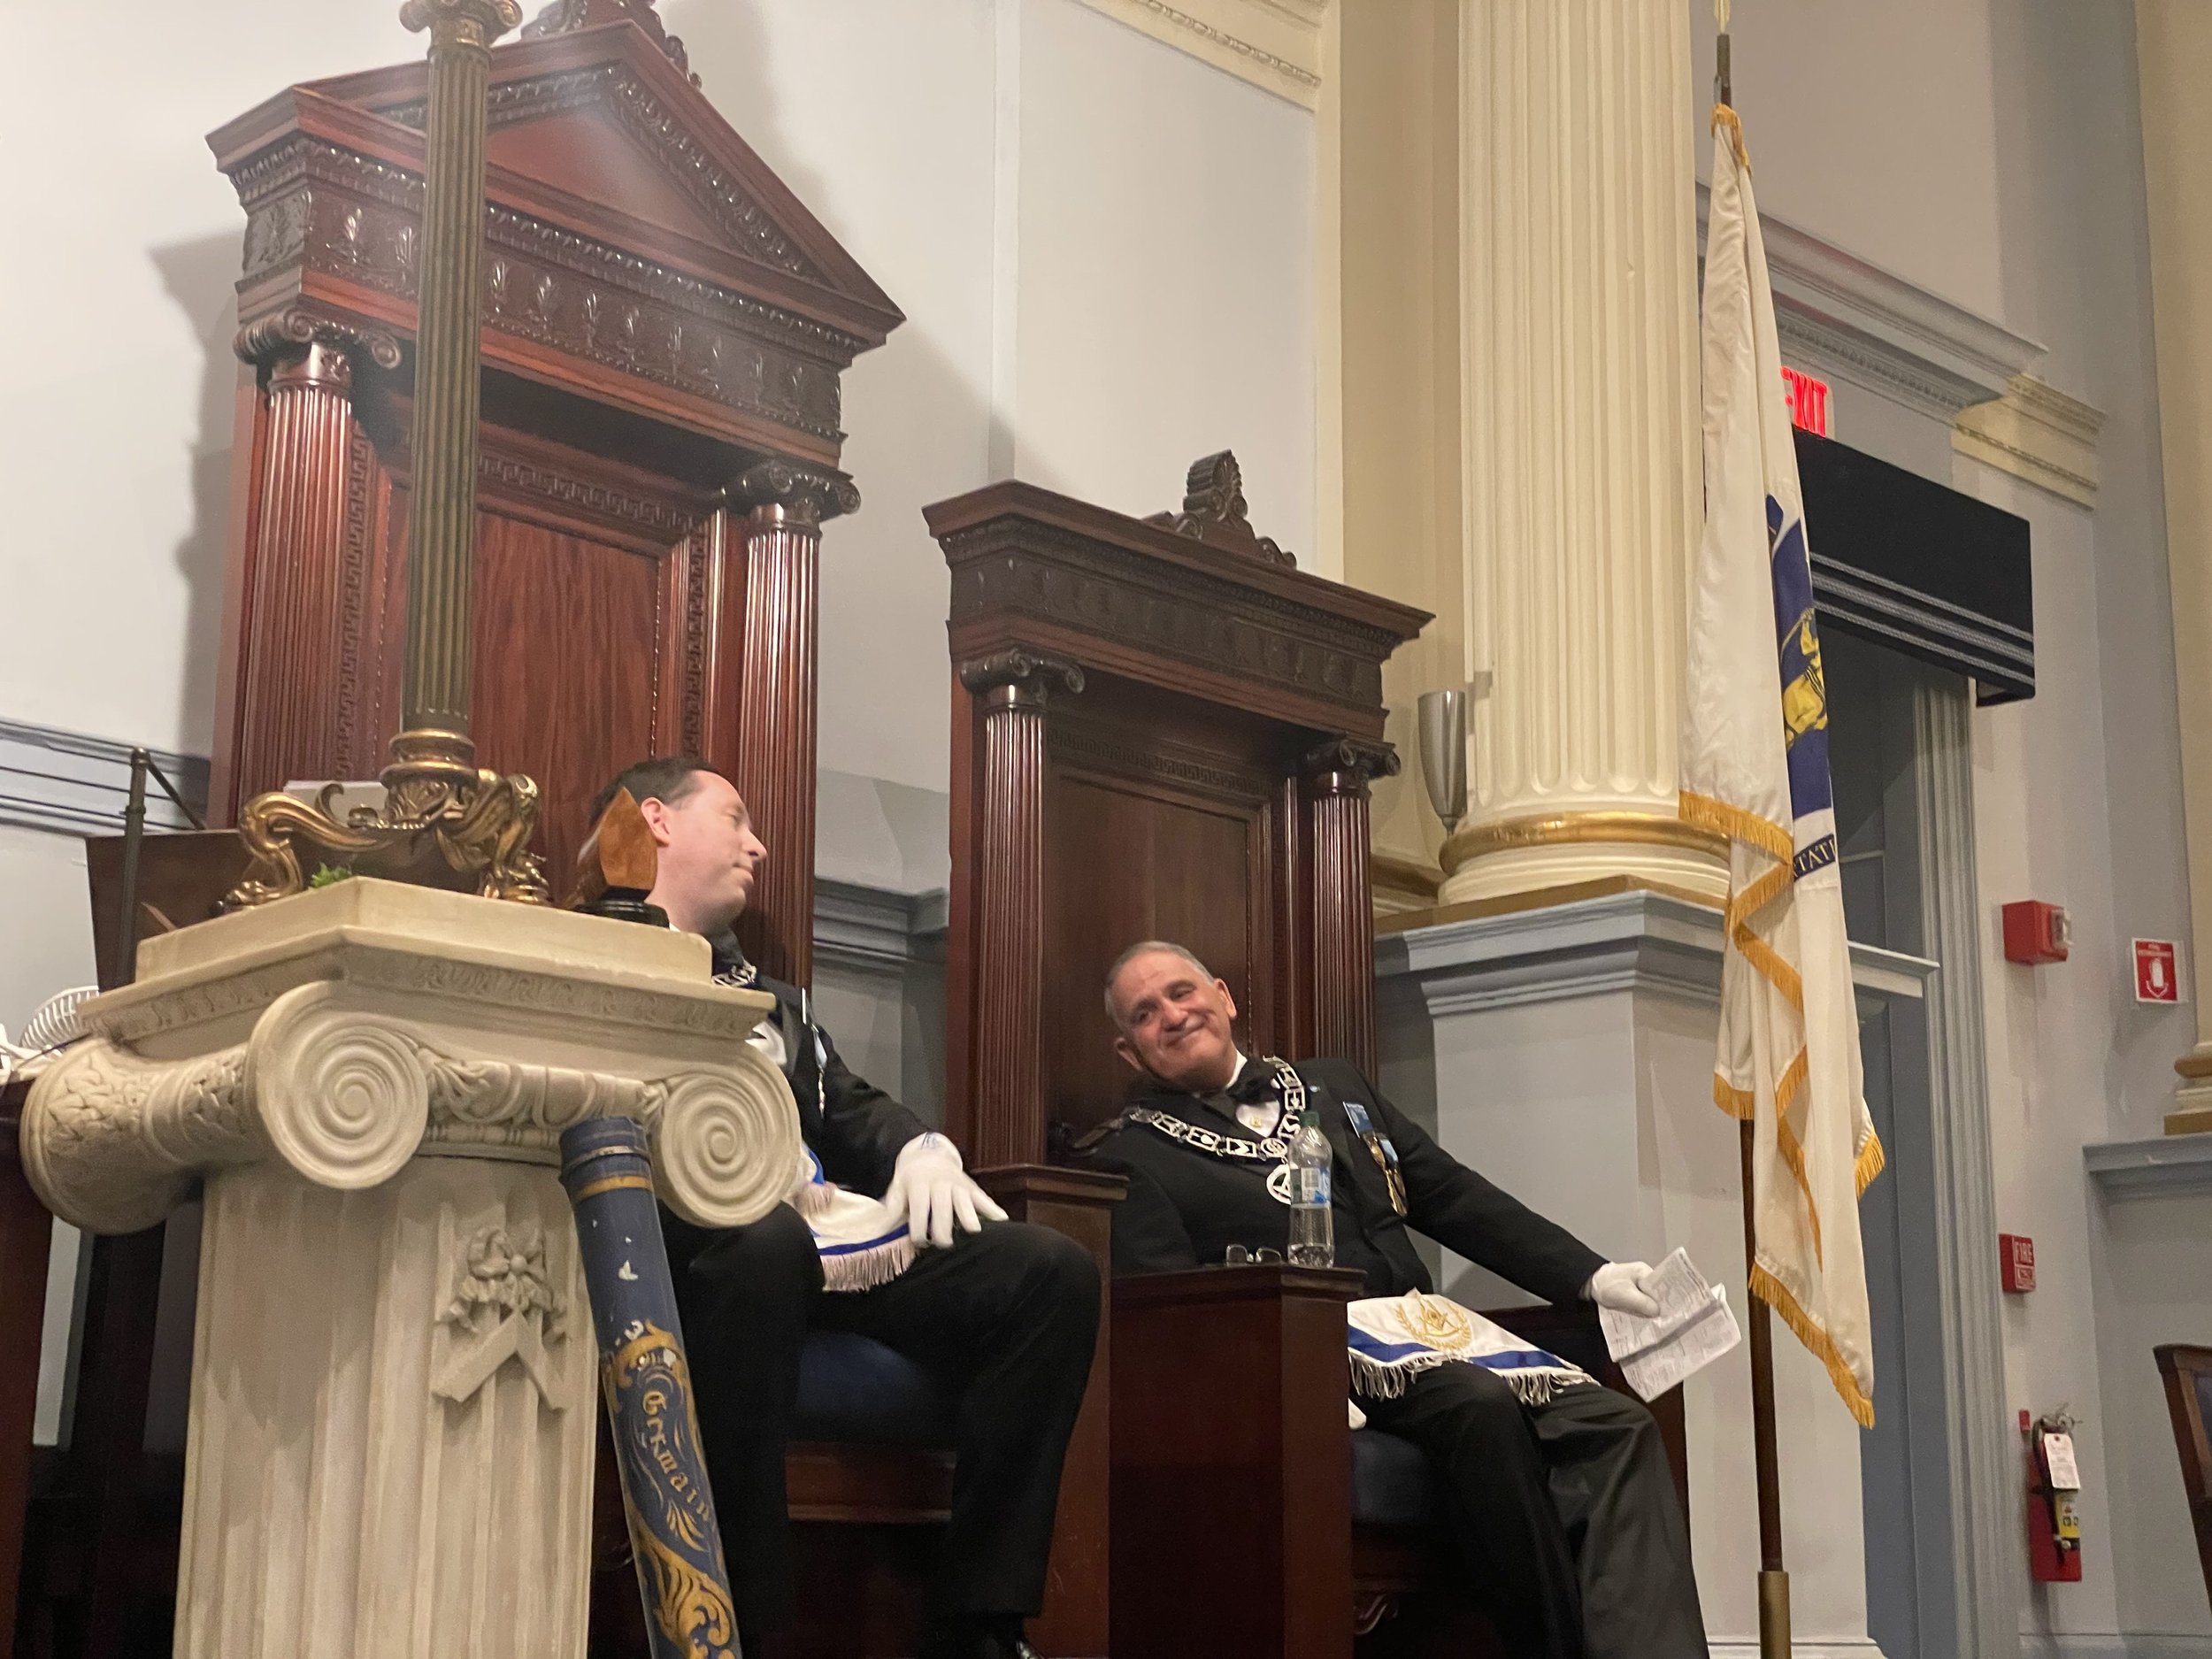  Bro. Evan Fisher, Senior Warden, sitting in as Master during a vote to extend honorary membership to the Worshipful Master, Wor. Brad Turnier, in honor of his years of service to the Lodge. 